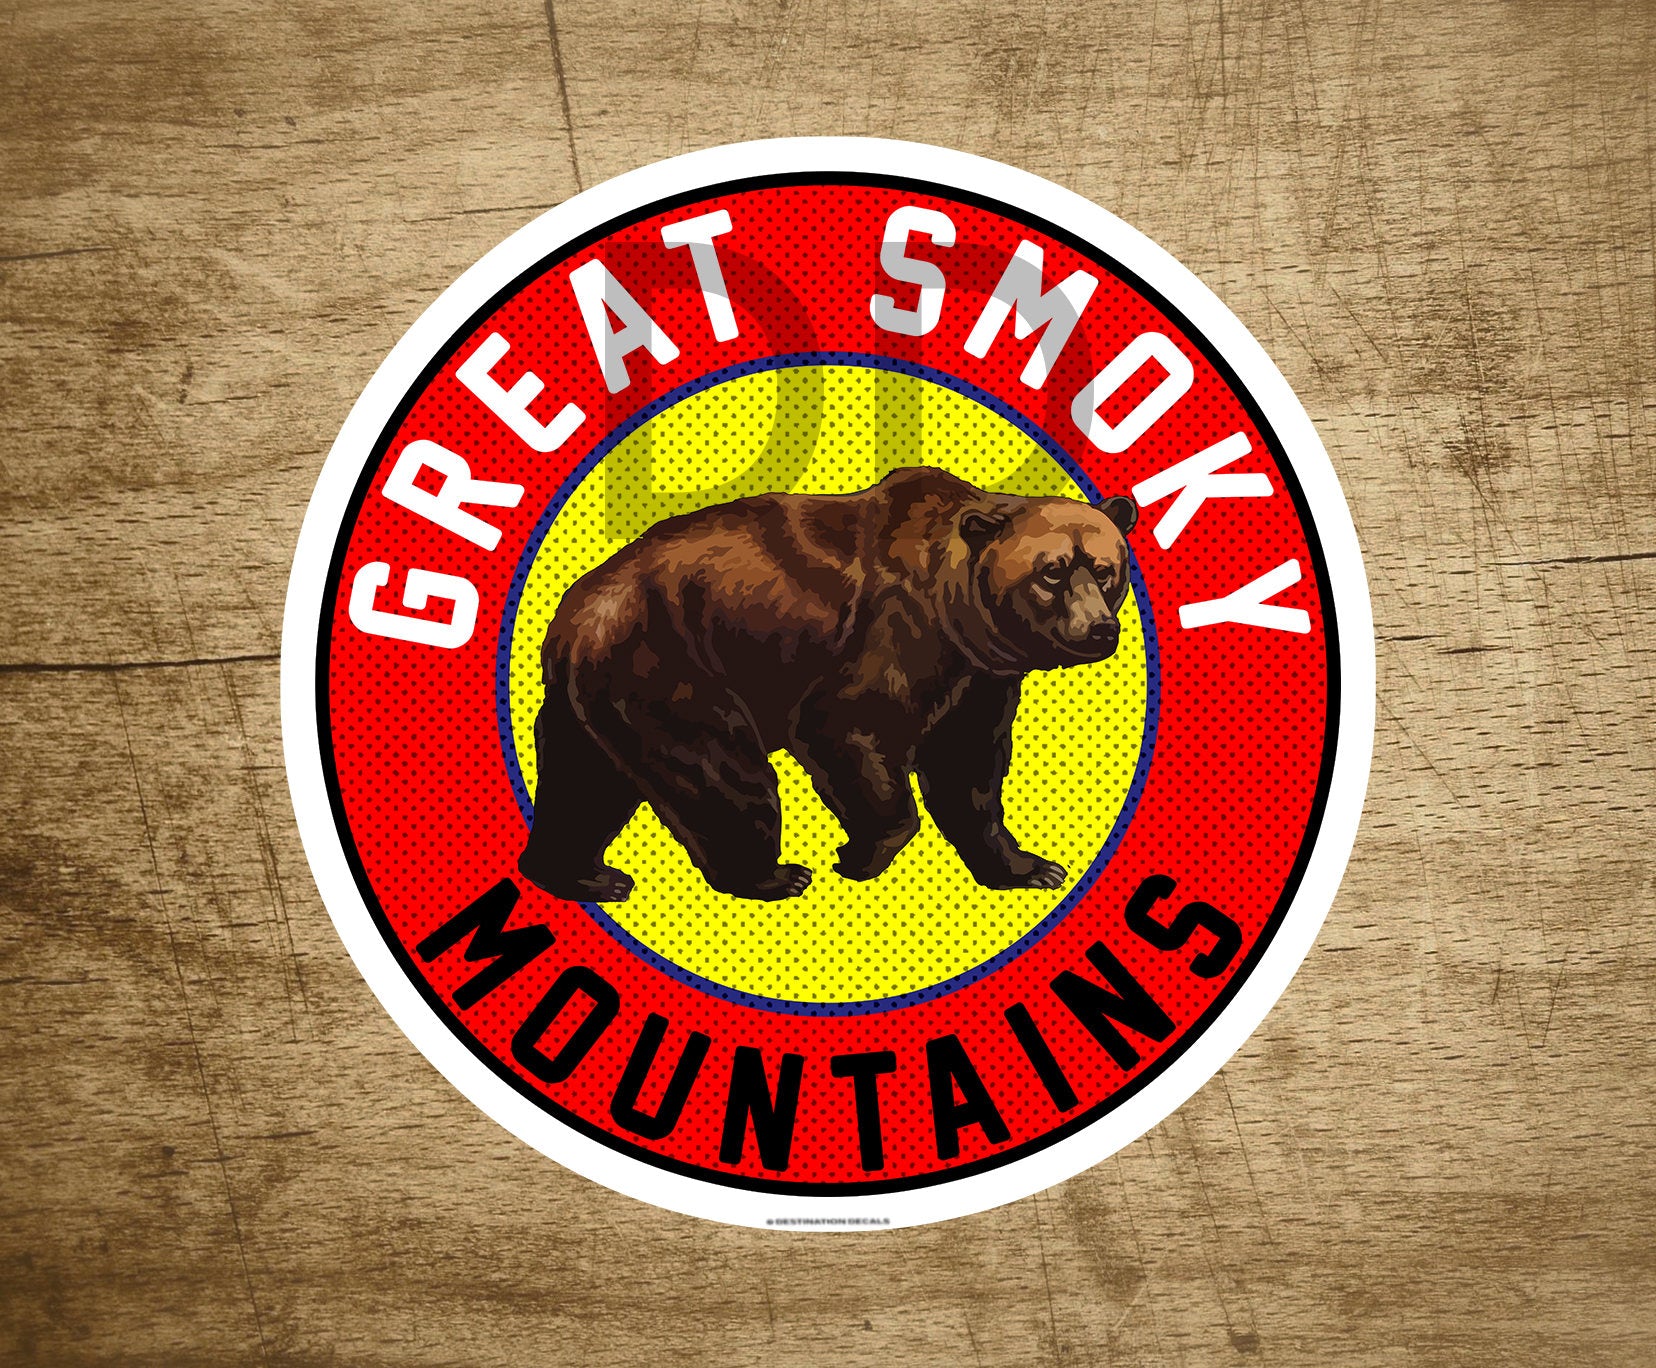 Great Smoky Mountains National Park Vinyl Decal Sticker 3" x 3" Tennessee Smokies Vintage Style